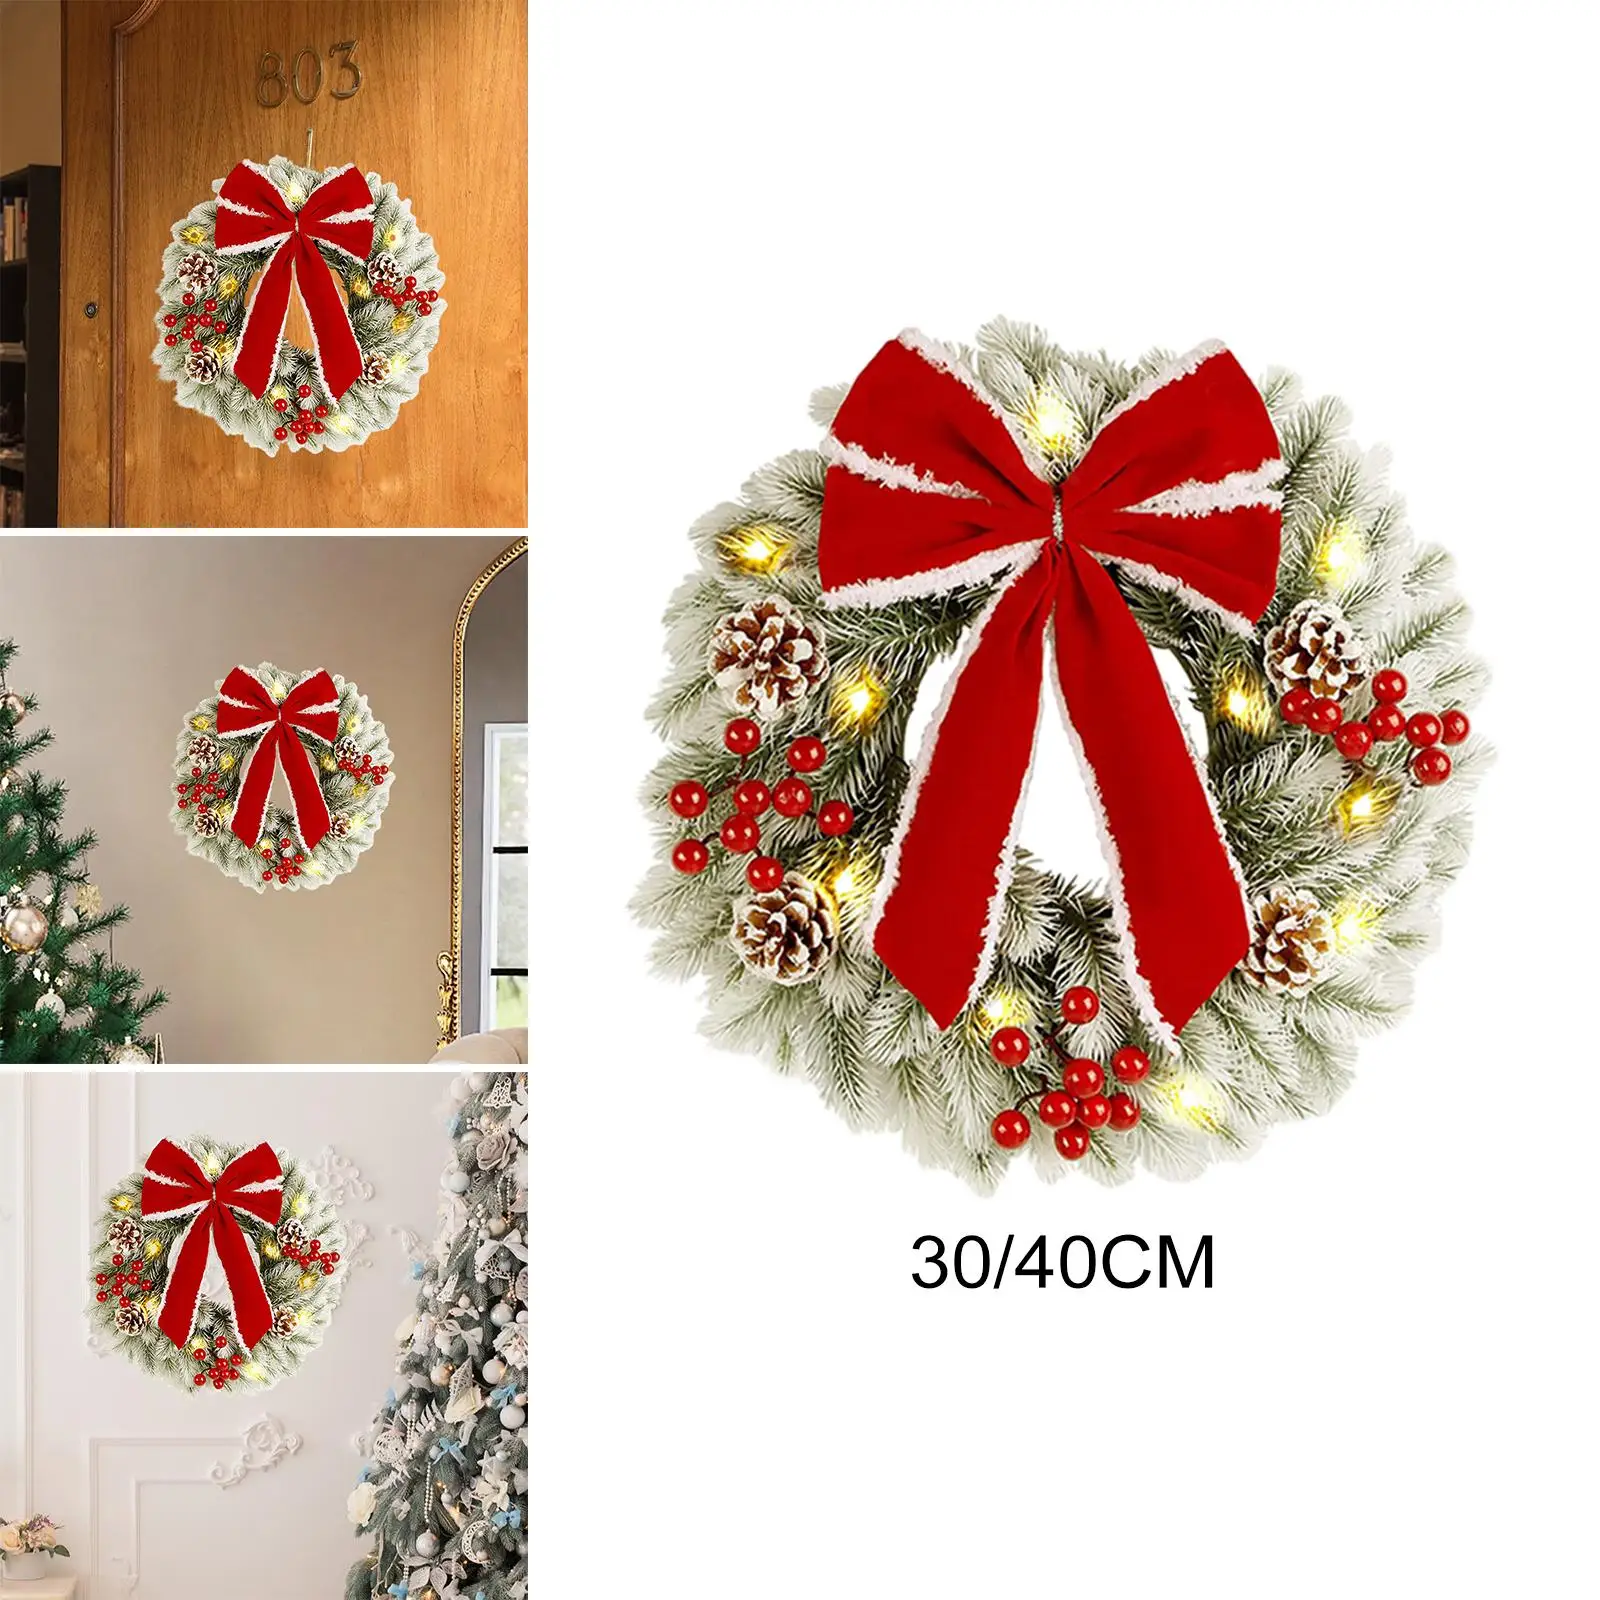 Christmas Wreath Party Festival Decorative Christmas Garland Hanging Artificial Decoration for Home Party Office Wall Decor